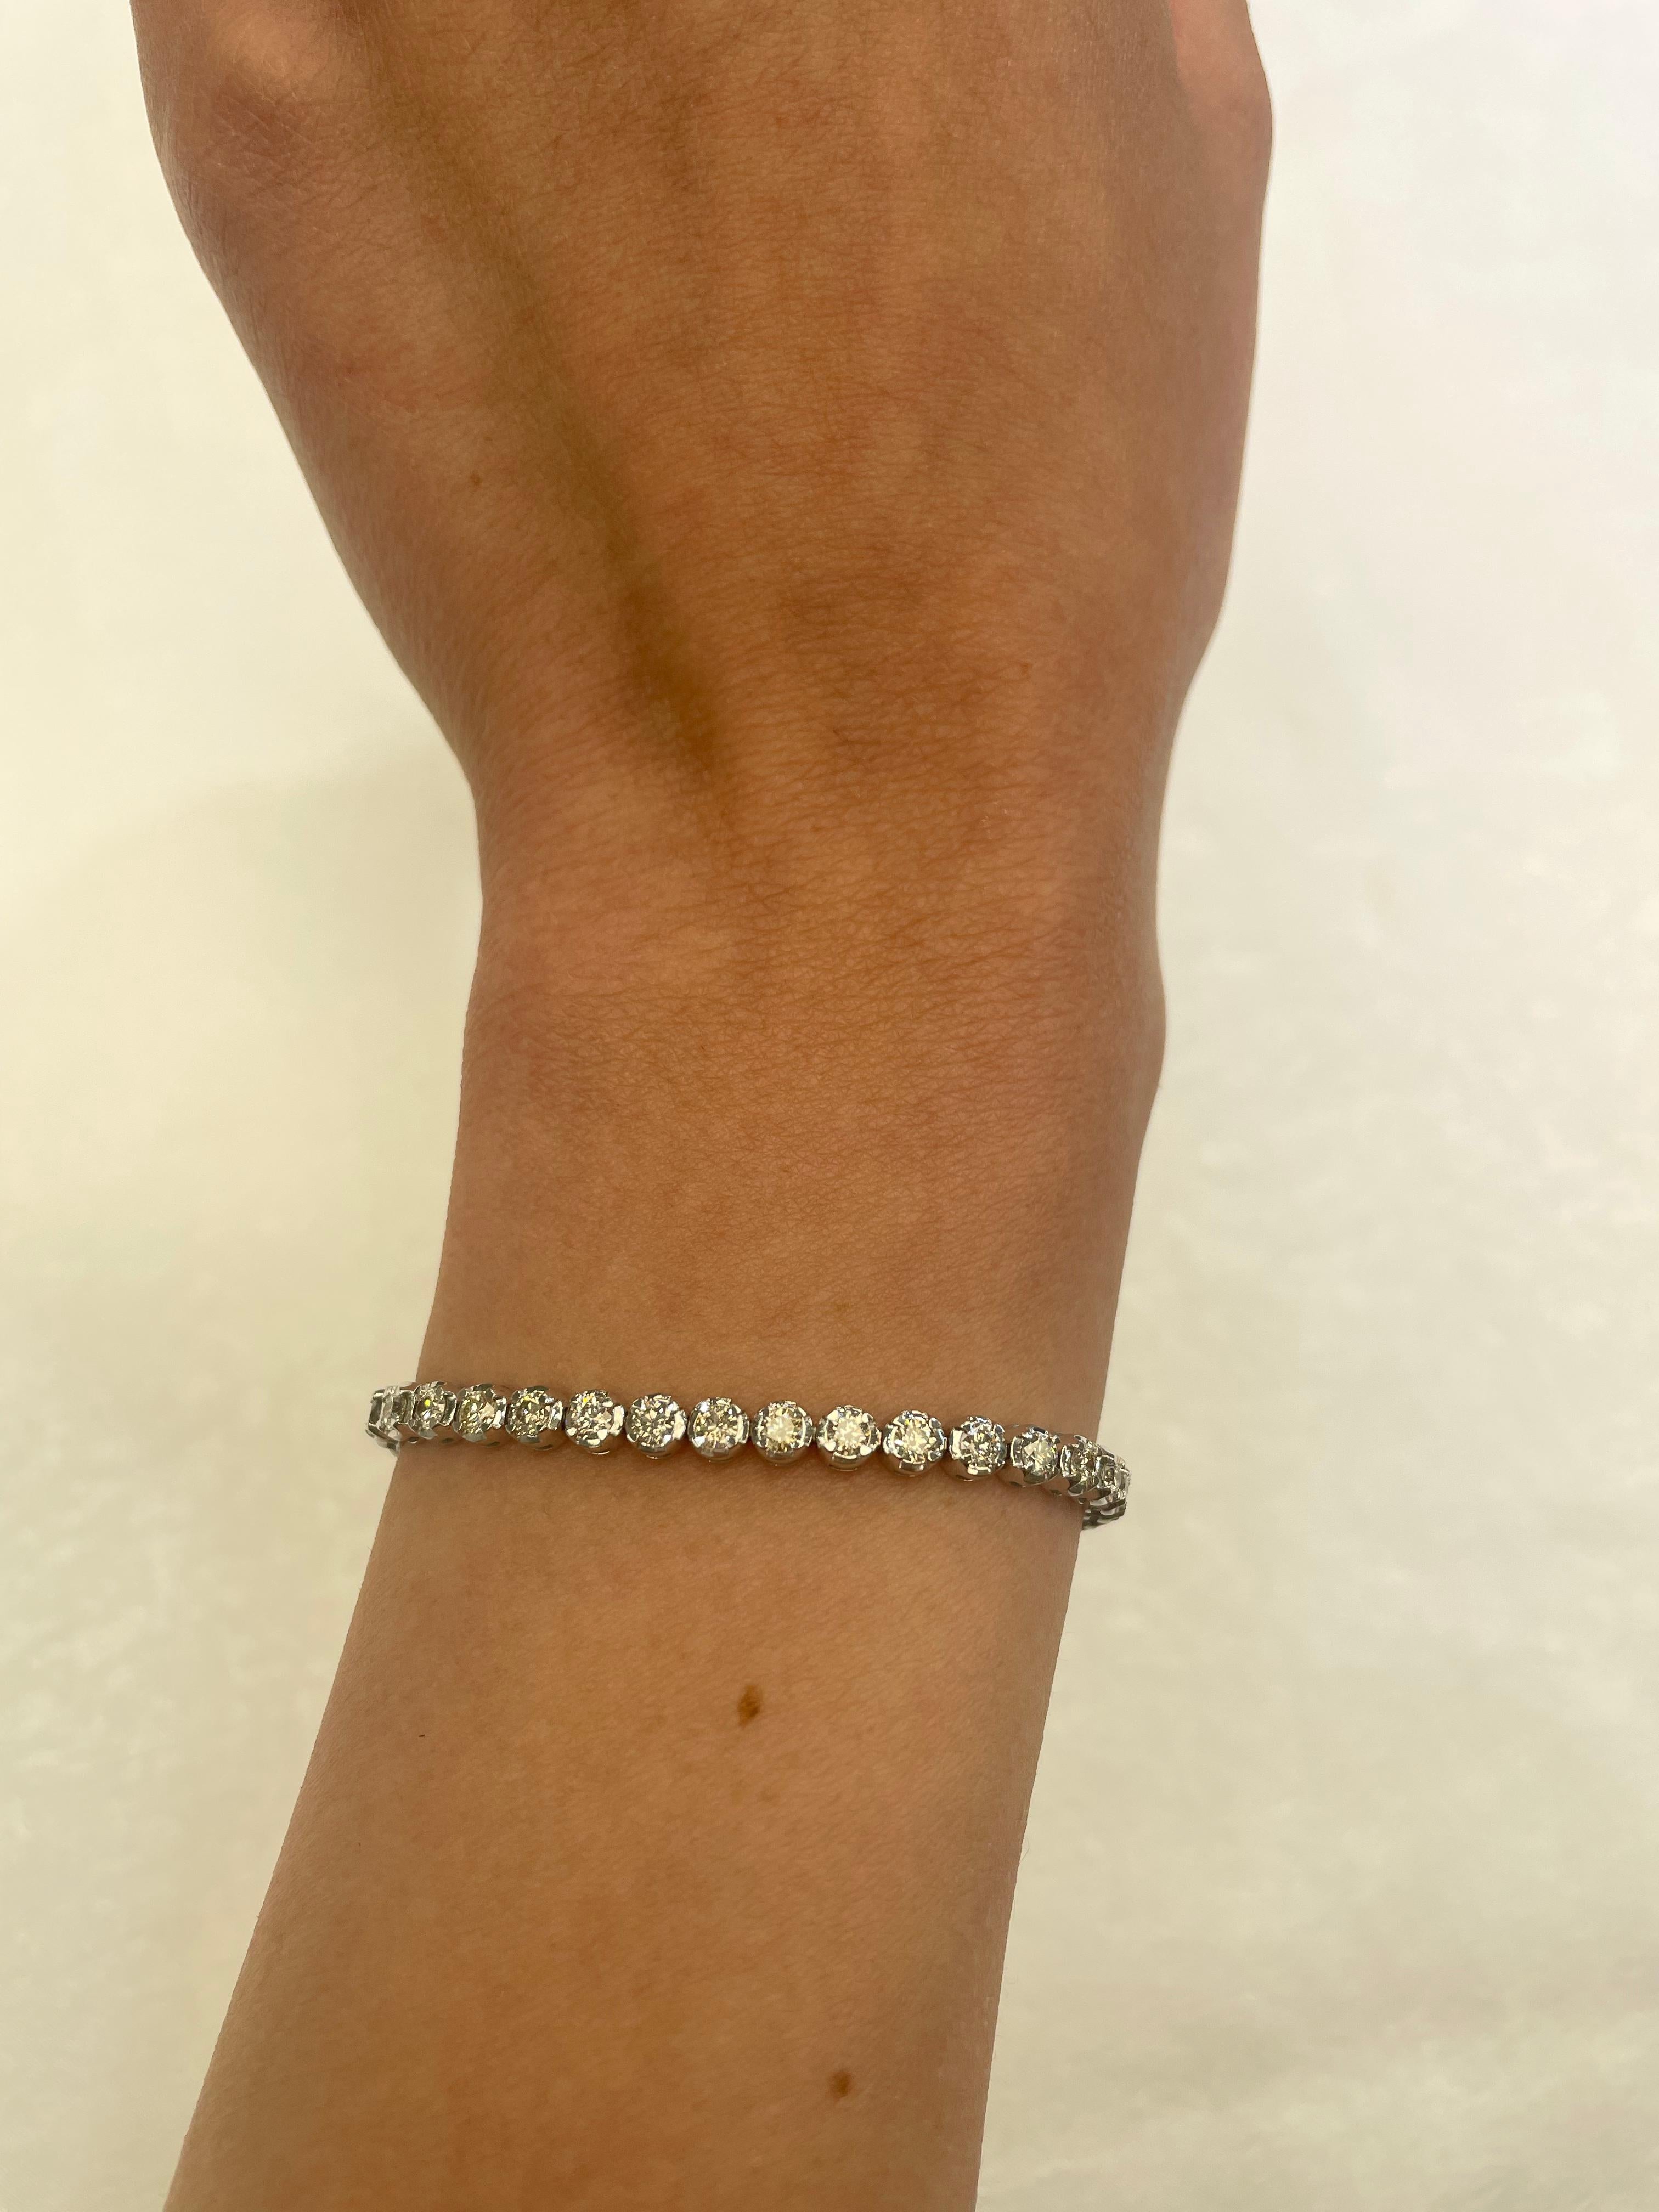 Exquisite and timeless diamonds tennis bracelet, by Alexander Beverly Hills.
40 round brilliant diamonds, 3.80 carats total. Approximately I/J color and SI clarity. Four prong set in 14k white gold, 10.49 grams, 7.75 inches. 
Accommodated with an